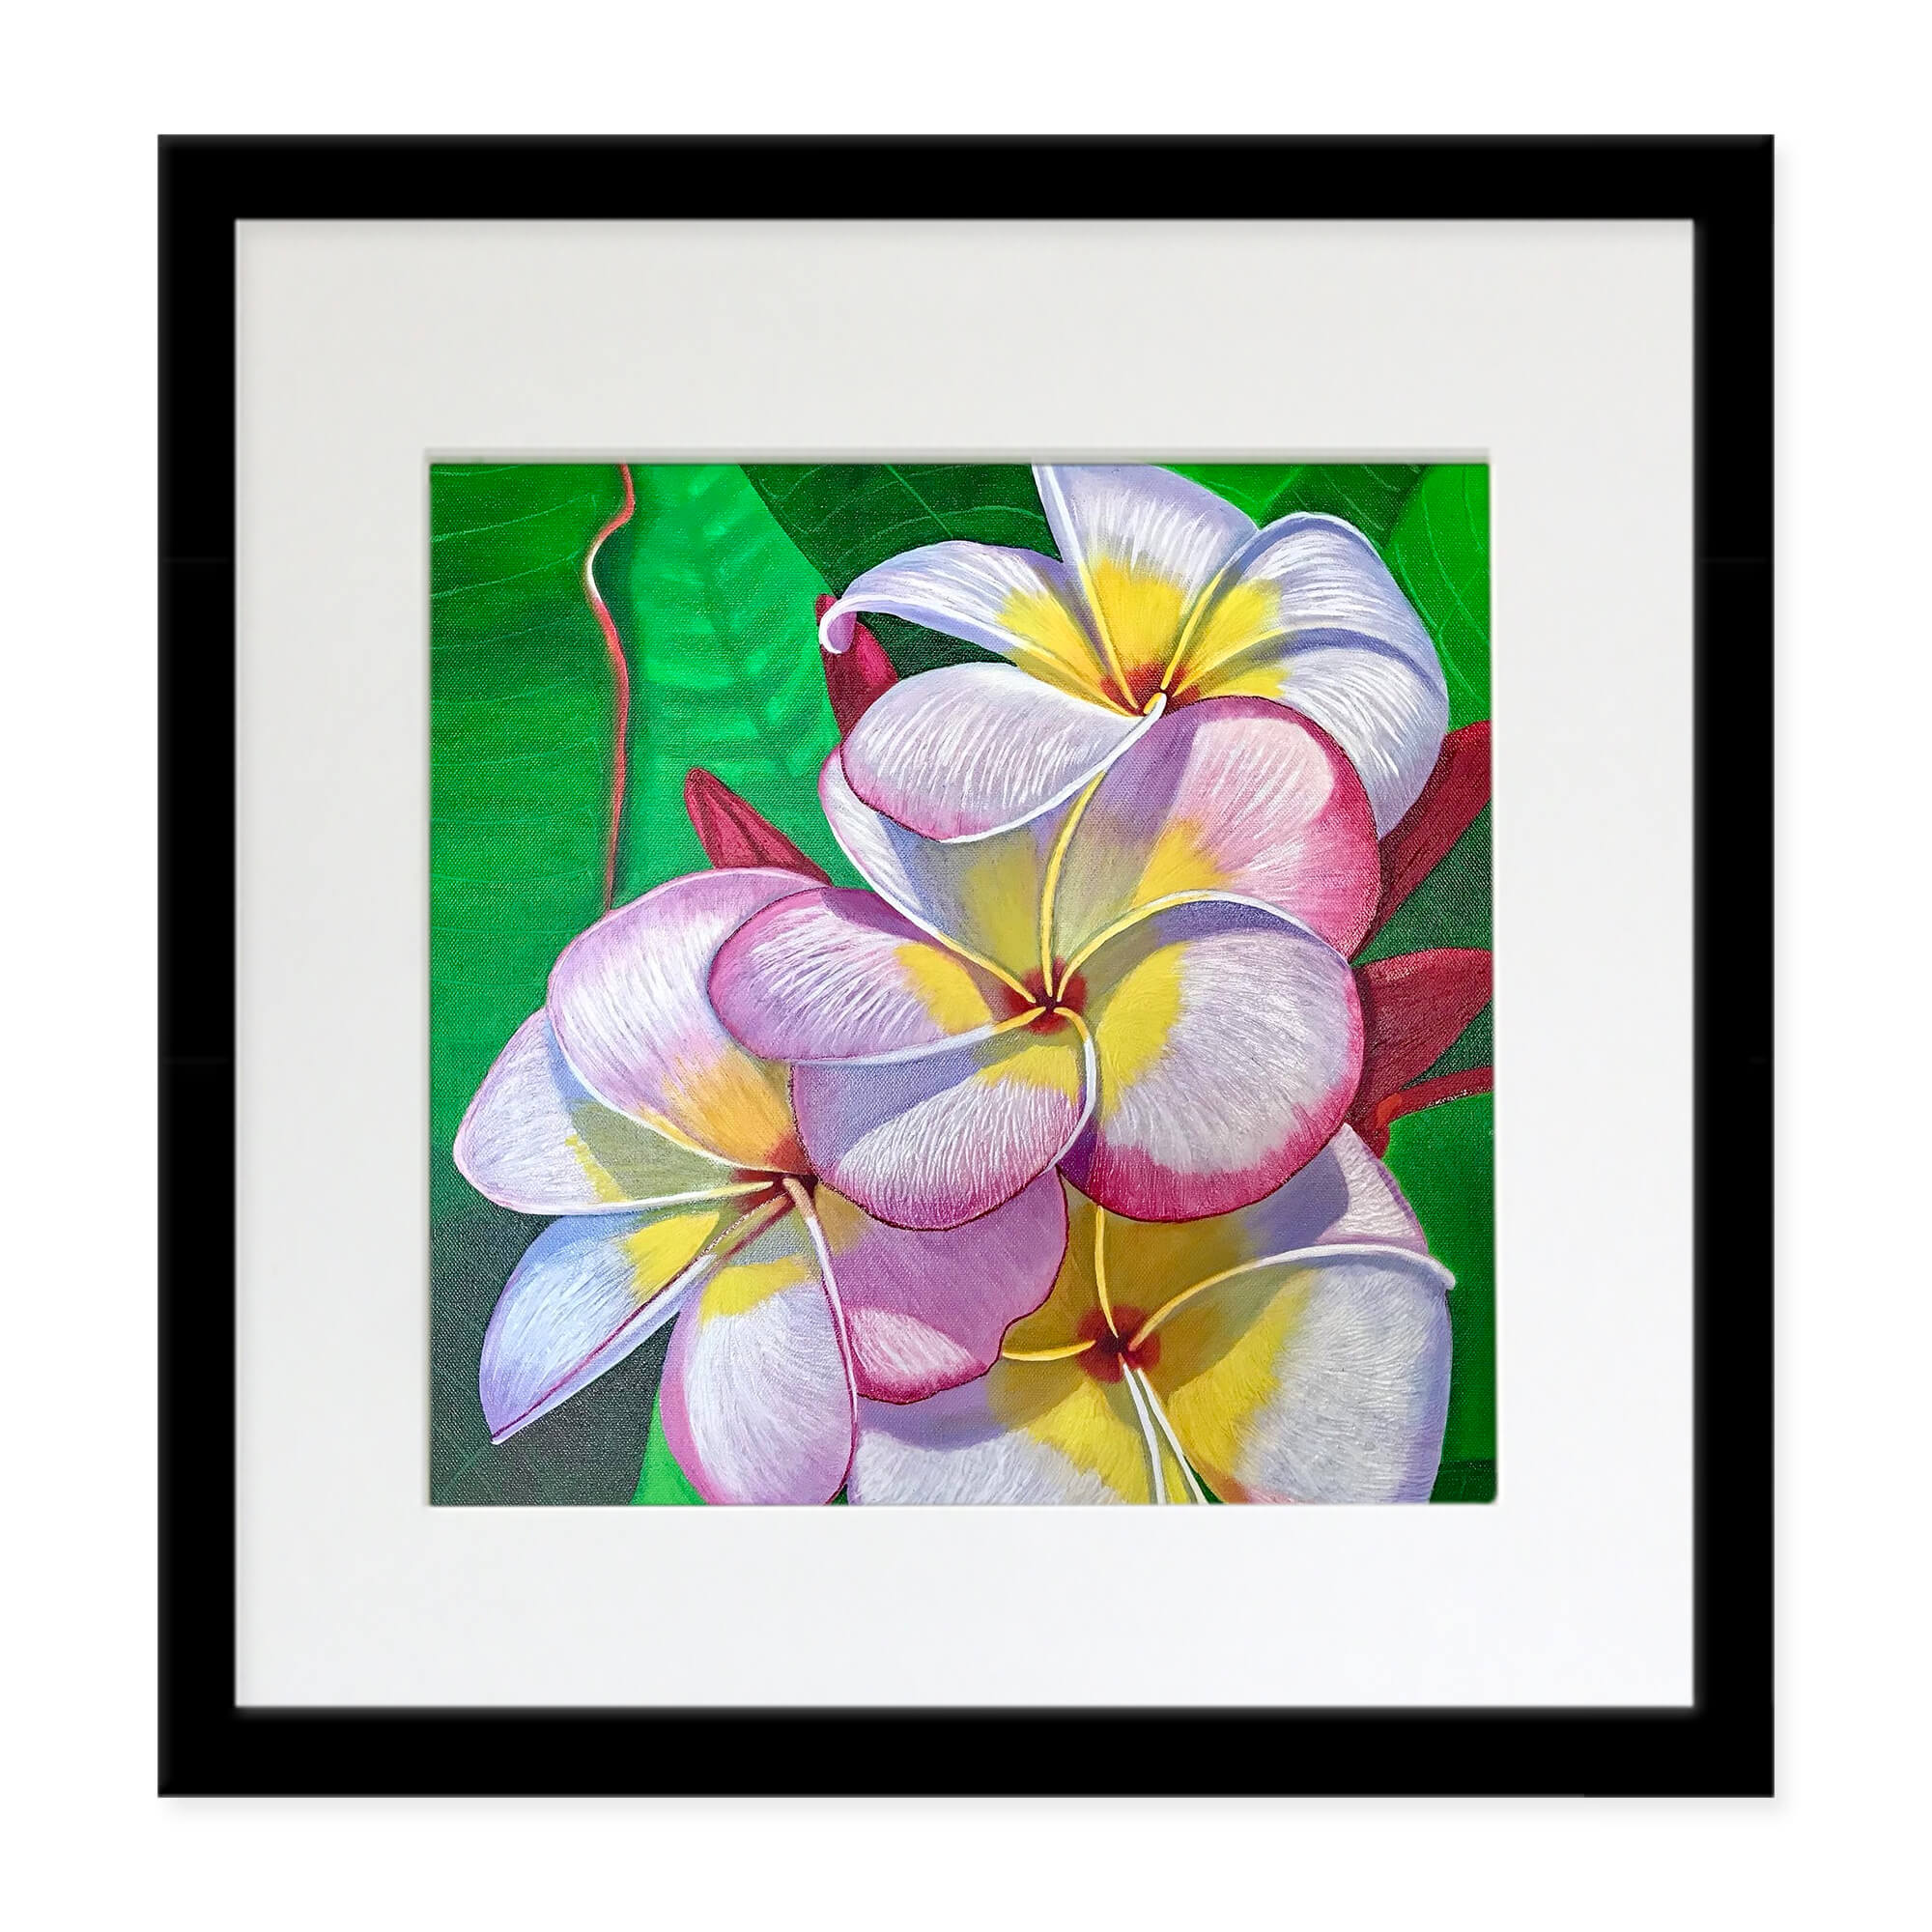 Matted art print with black frame showcasing a white flower with a touch of pink by hawaii artist Galina Lintz